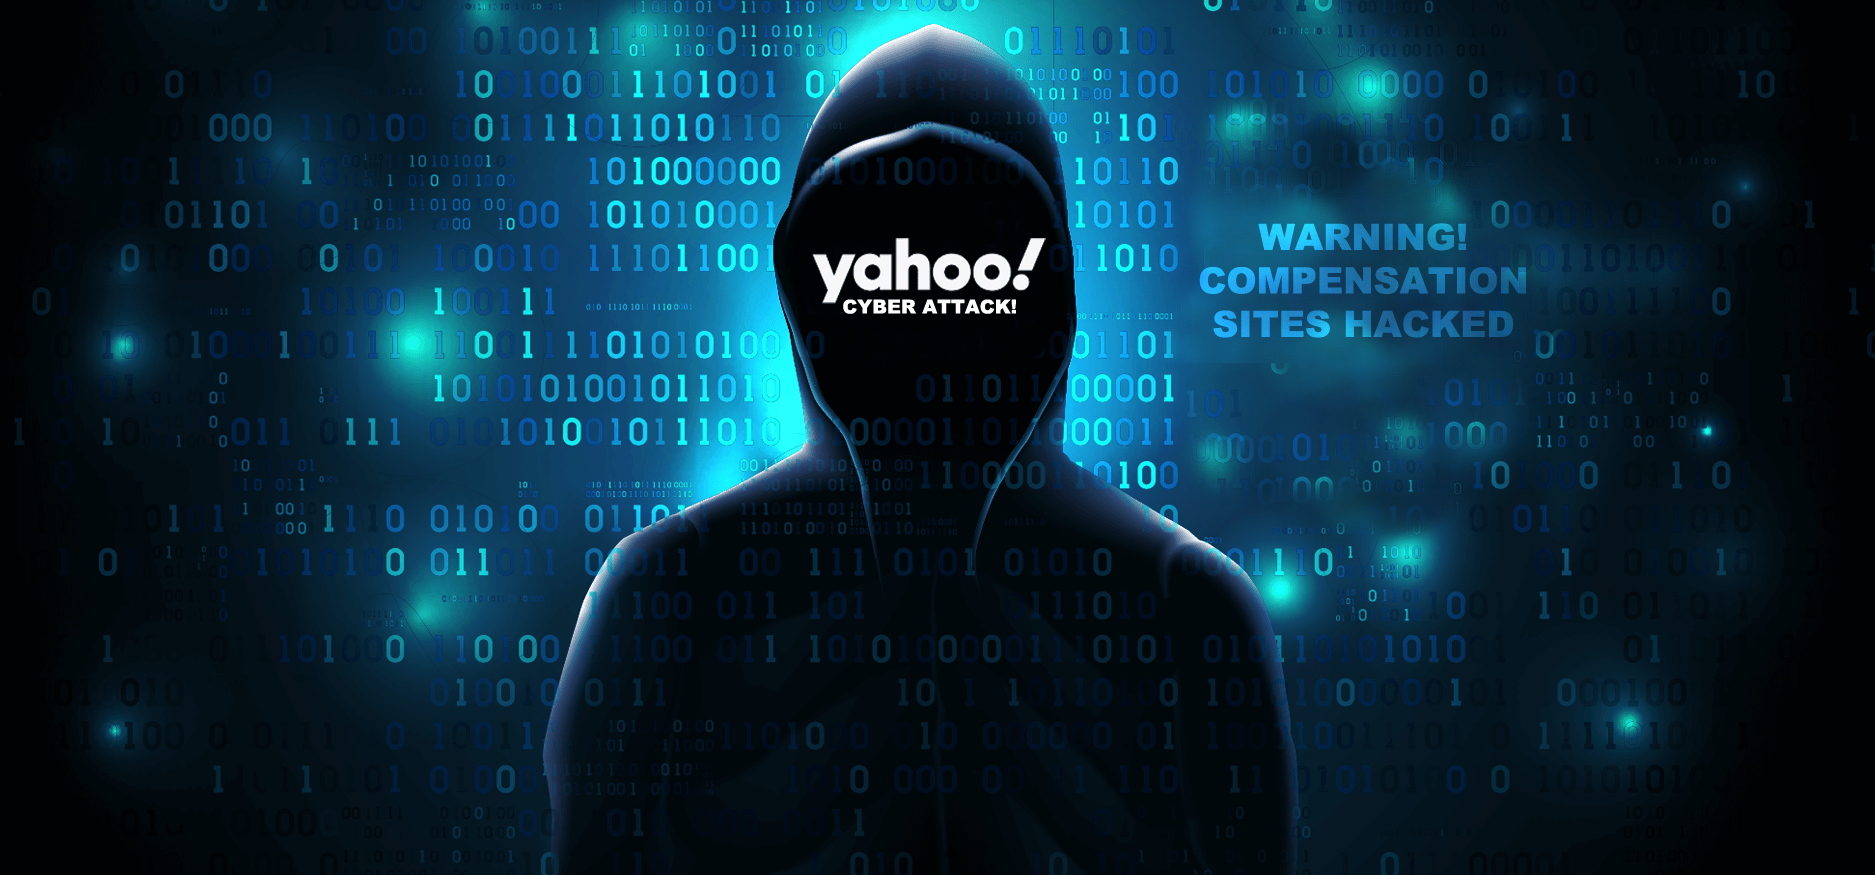 Yahoo - Cyber Attack 2012-16 You still have time to claim!